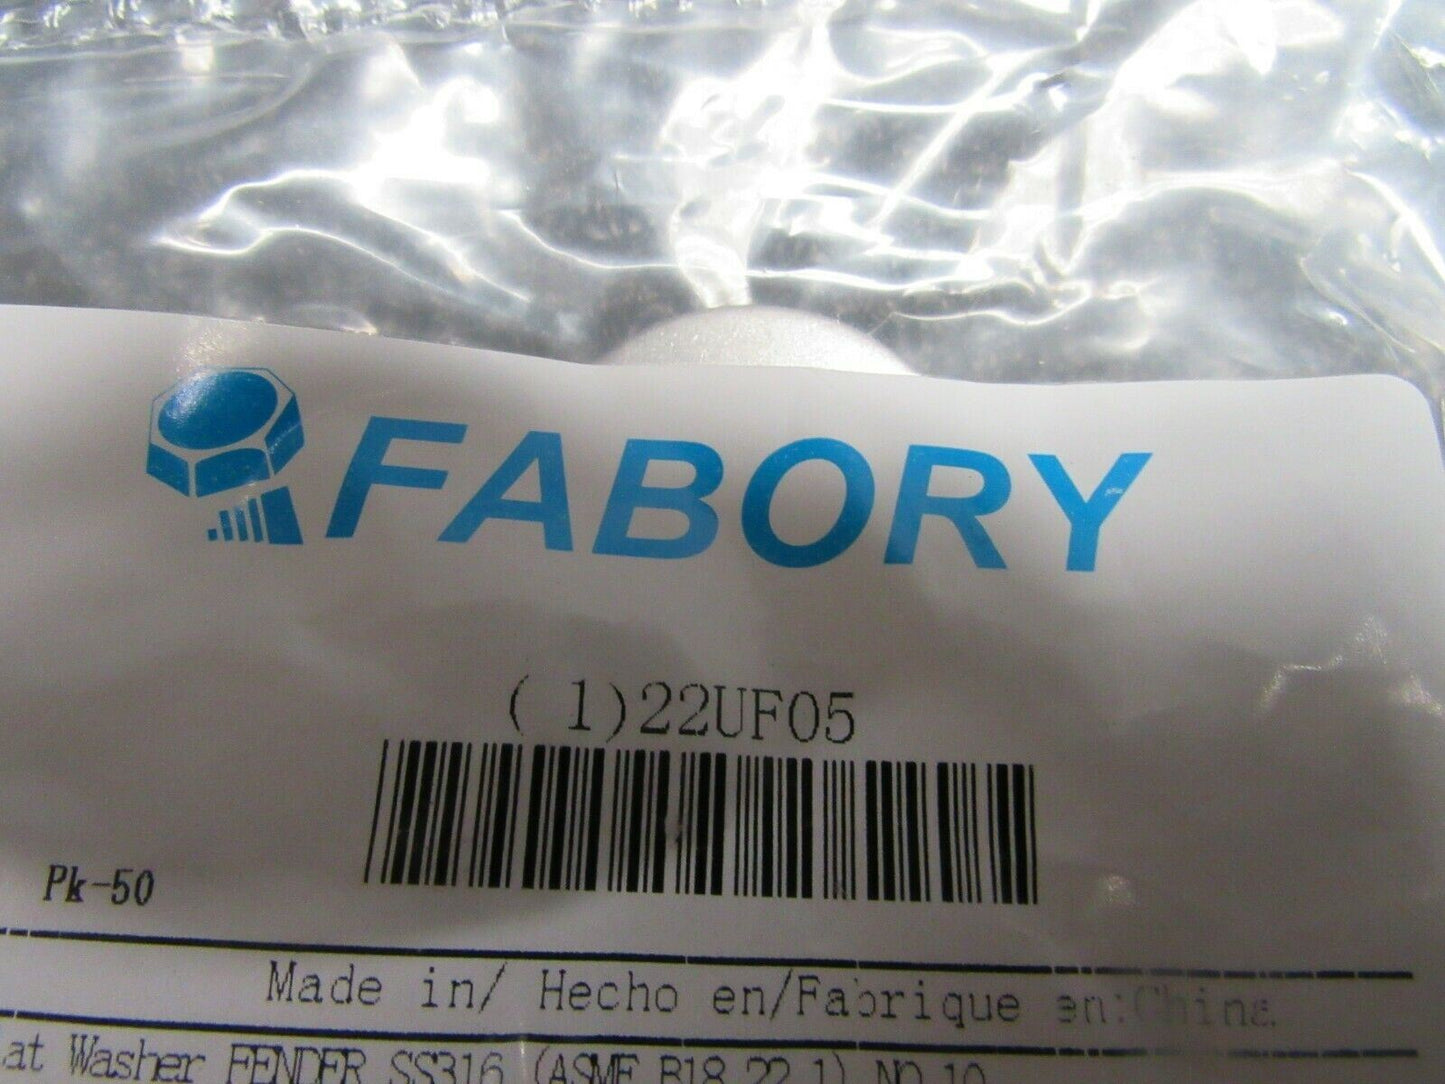 (50) FABORY 3/16" x 1-1/4" O.D., Fender Washer, 316 Stainless Steel, 22UF05 (184264826653-BT45)